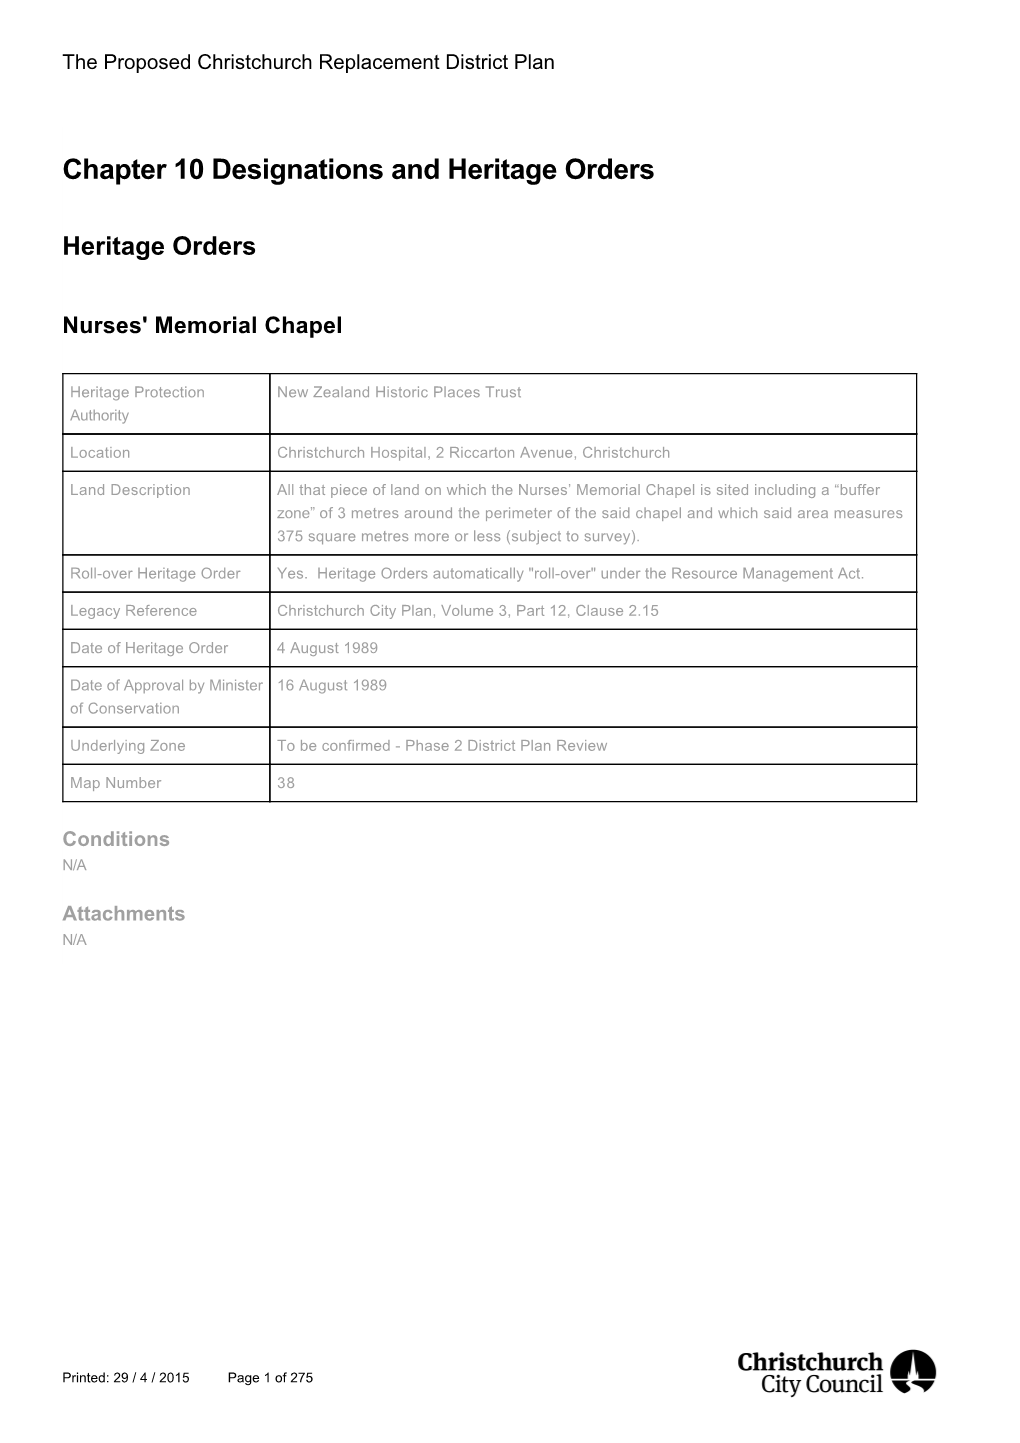 Chapter 10 Designations and Heritage Orders